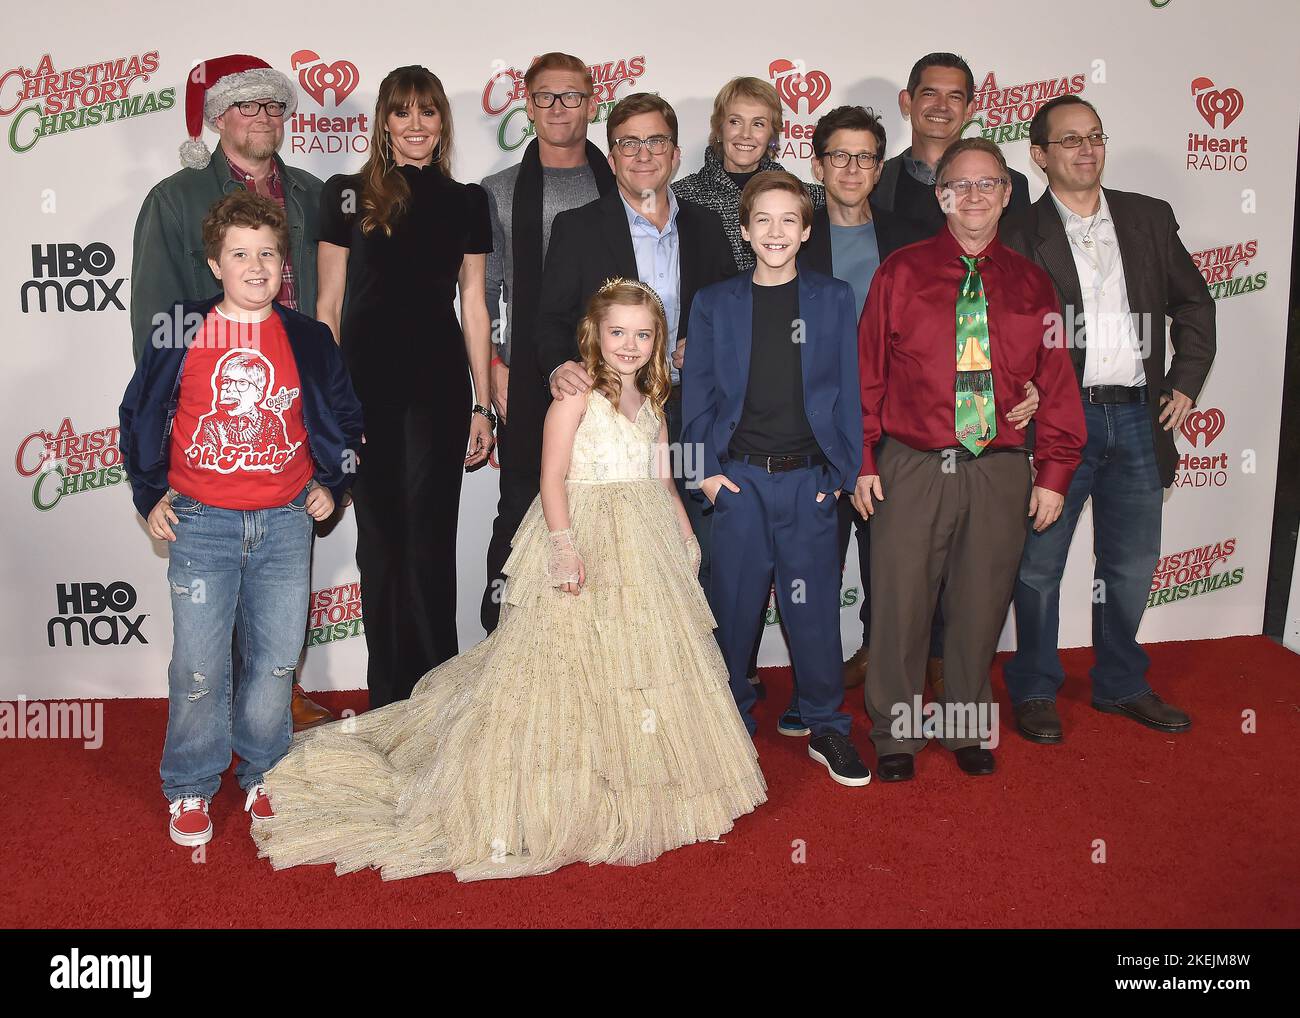 Los Angeles, USA. 13th Nov, 2022. Nick Schenk (Executive Producer), Davis Murphy, Erinn Hayes, Zach Ward, Julianna Layne, Peter Billingsley, Julie Hagerty, River Drosche, RD Robb, Clay Katis (Director), Scott Schwartz and Ian Petrella walking the red carpet at the Warner Brothers and HBO Max Special Outdoor Screening of “A Christmas Story Christmas” at The Autry Museum at Griffith Park in Los Angeles, CA on November 12, 2022. (Photo By Scott Kirkland/Sipa USA) Credit: Sipa USA/Alamy Live News Stock Photo